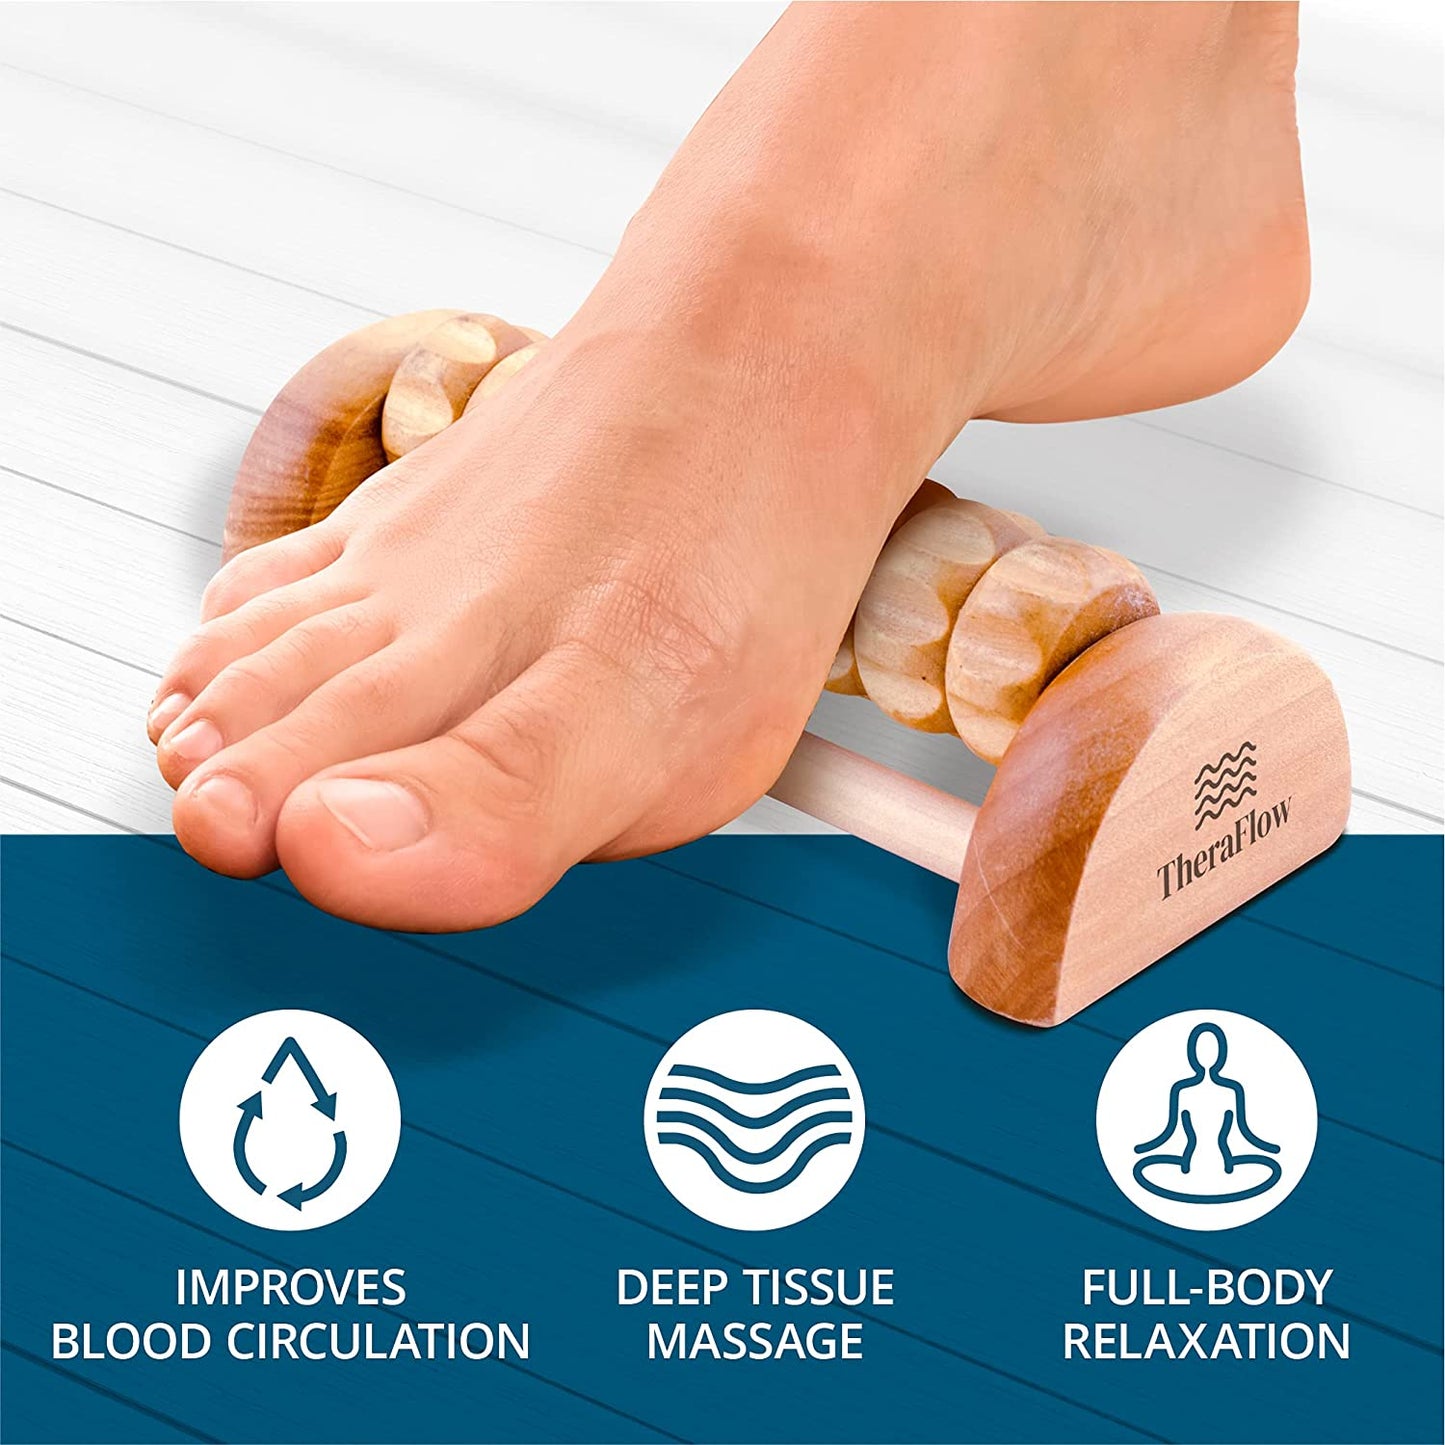 Foot Massager Roller - Plantar Fasciitis & Stress Relief, Foot Arch Pain, Muscle Aches, Soreness - Stimulates Myofascial Release - Foot Tension, Tightness - Relaxation Gifts for Women, Men